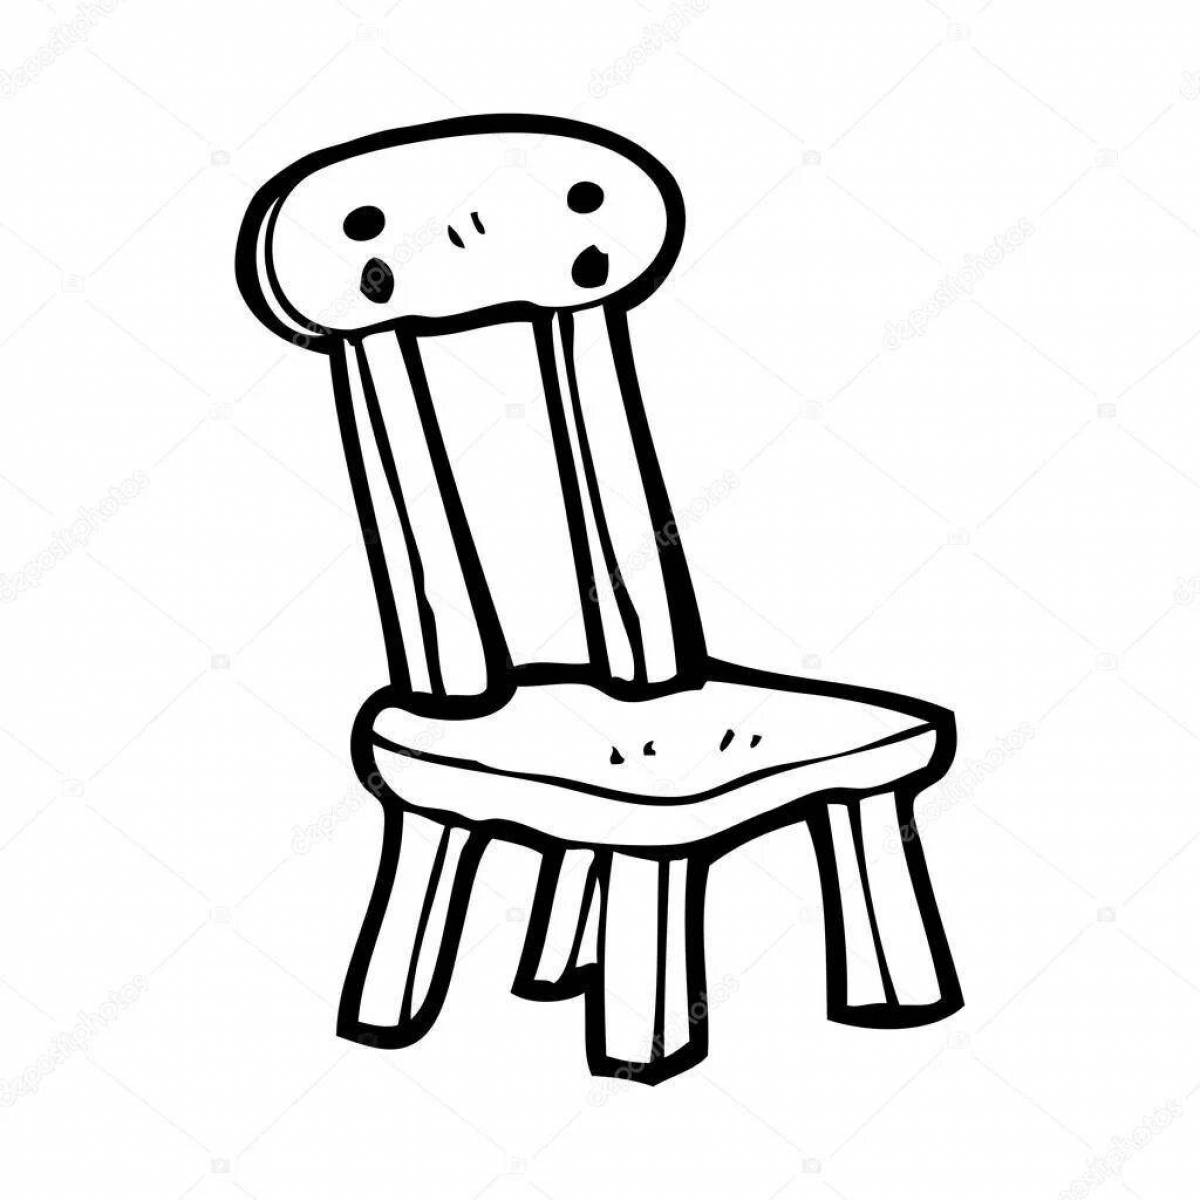 Color-frenzy chair coloring page для детей 3-4 лет